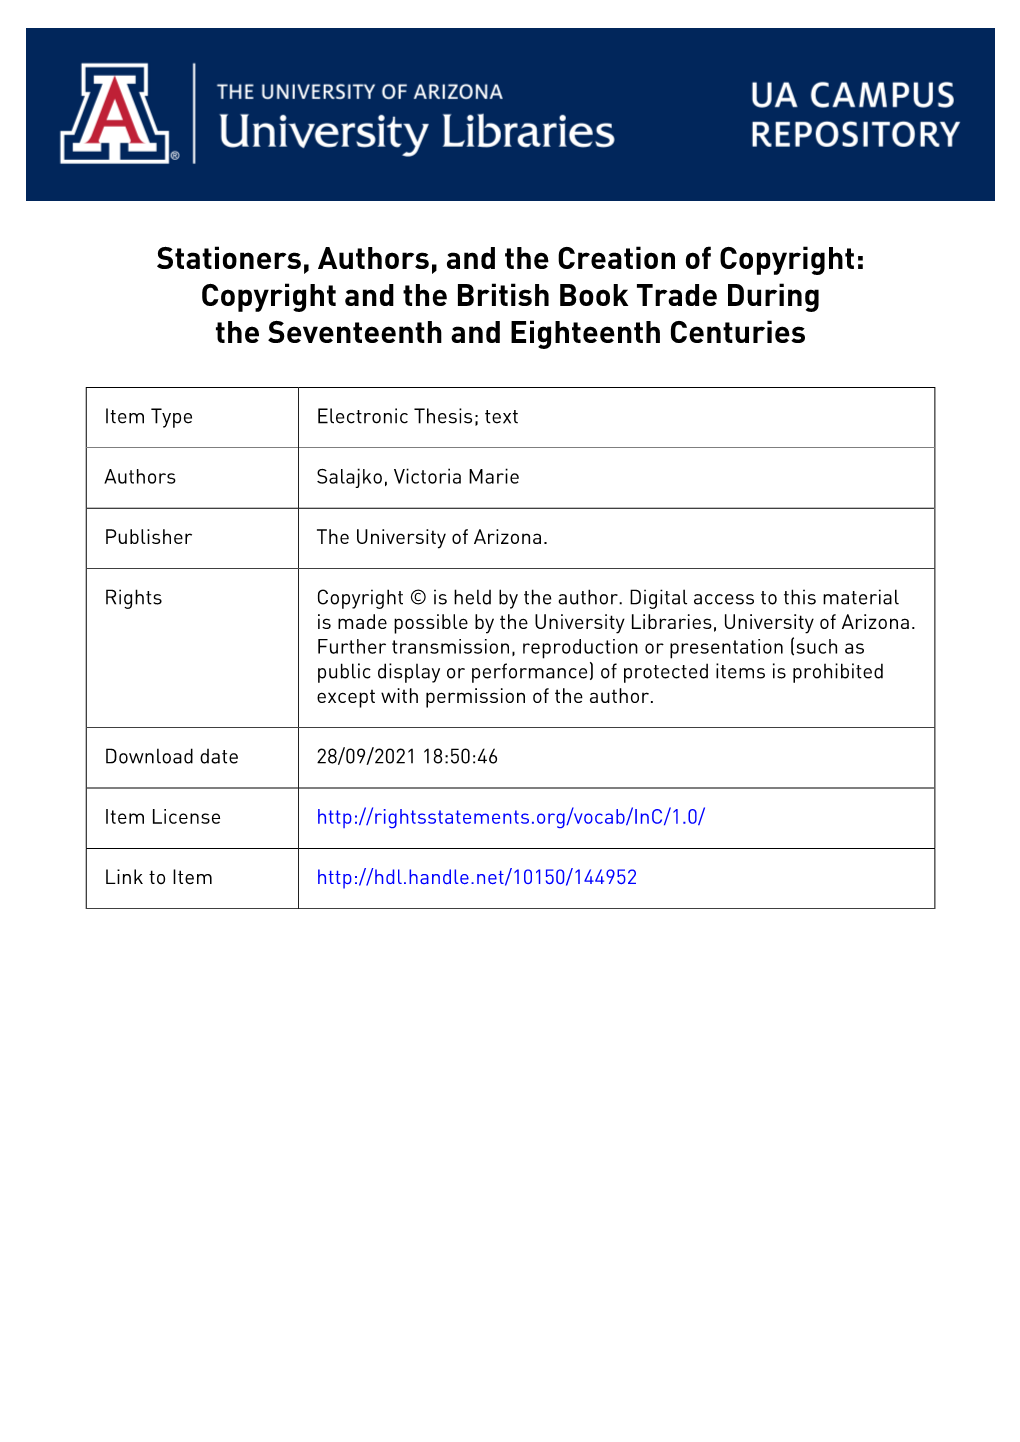 Stationers, Authors, and the Creation of Copyright: Copyright and the British Book Trade During the Seventeenth and Eighteenth Centuries